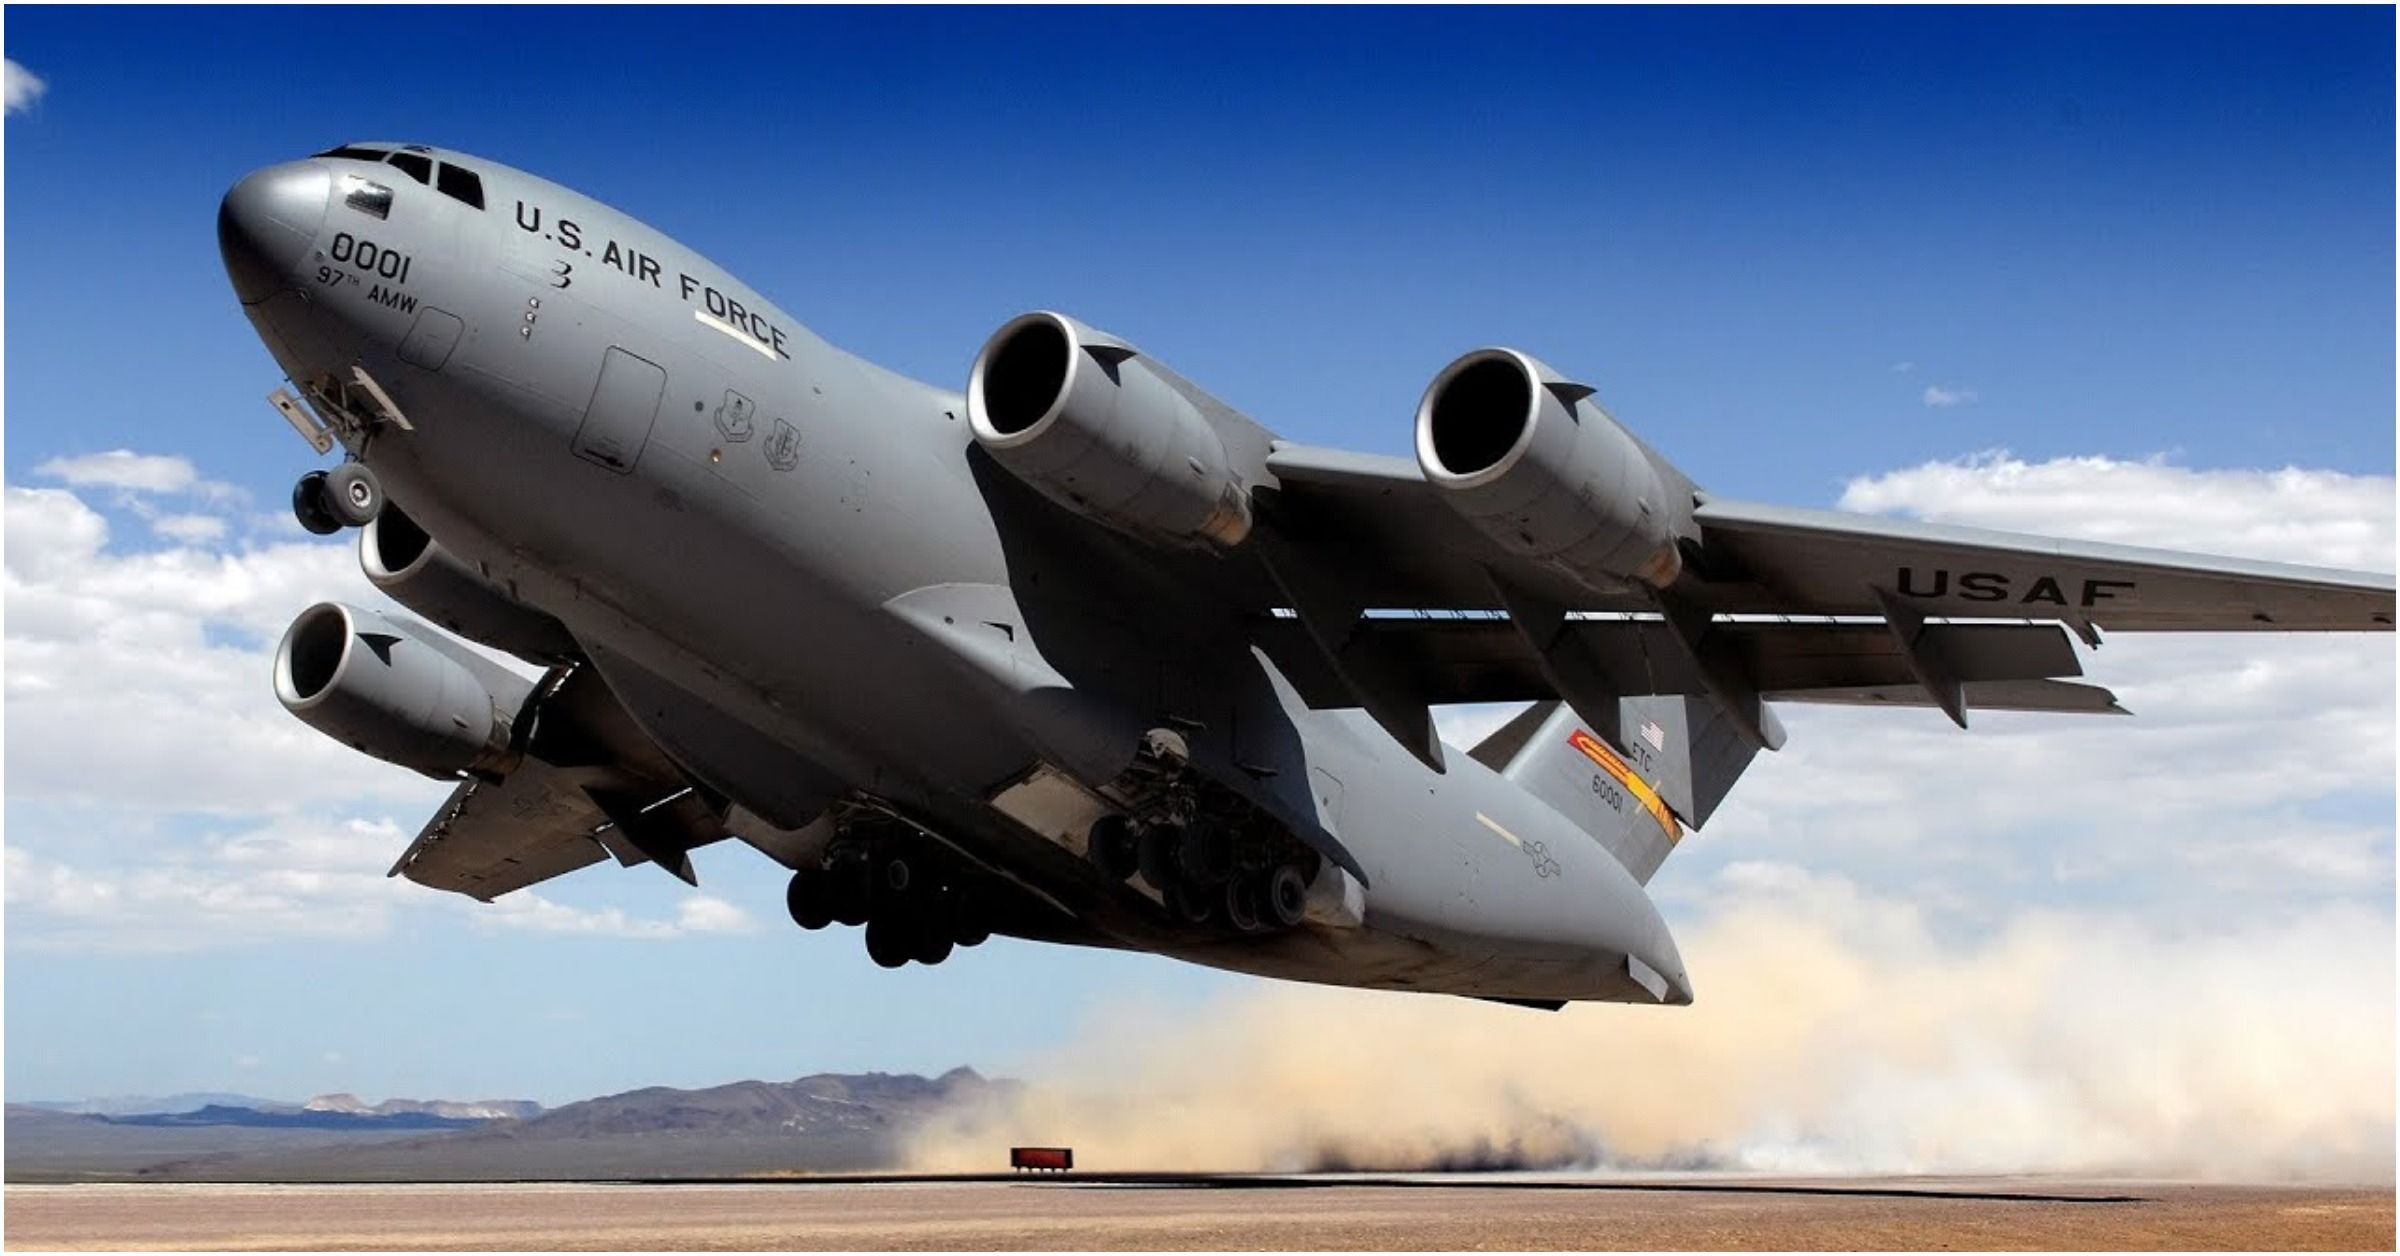 Sky Fortresses - 15 Biggest Aircraft Under US Airforce's Command